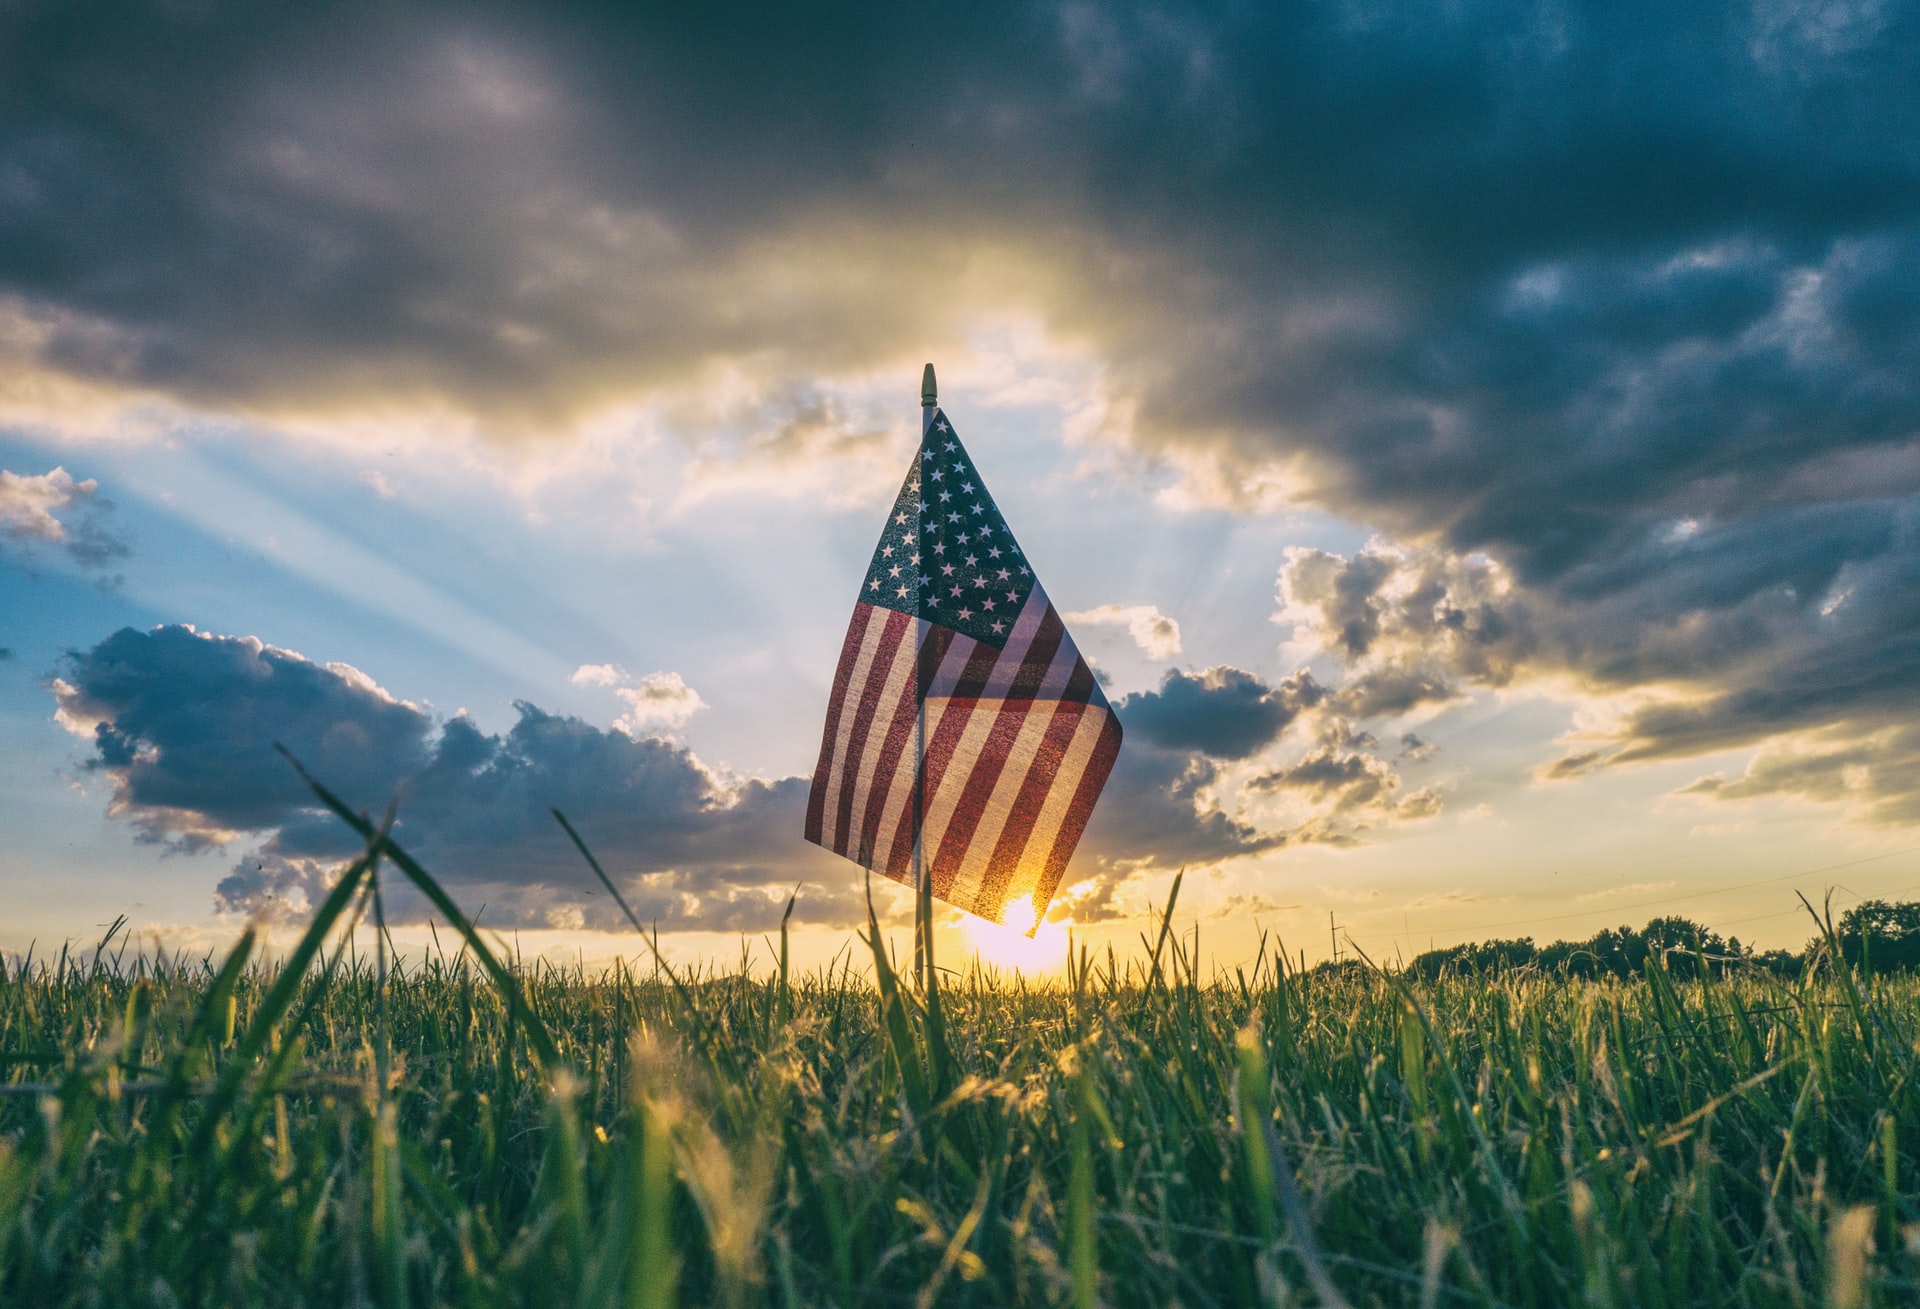 The Heartland Heartbeat – 4th of July Edition